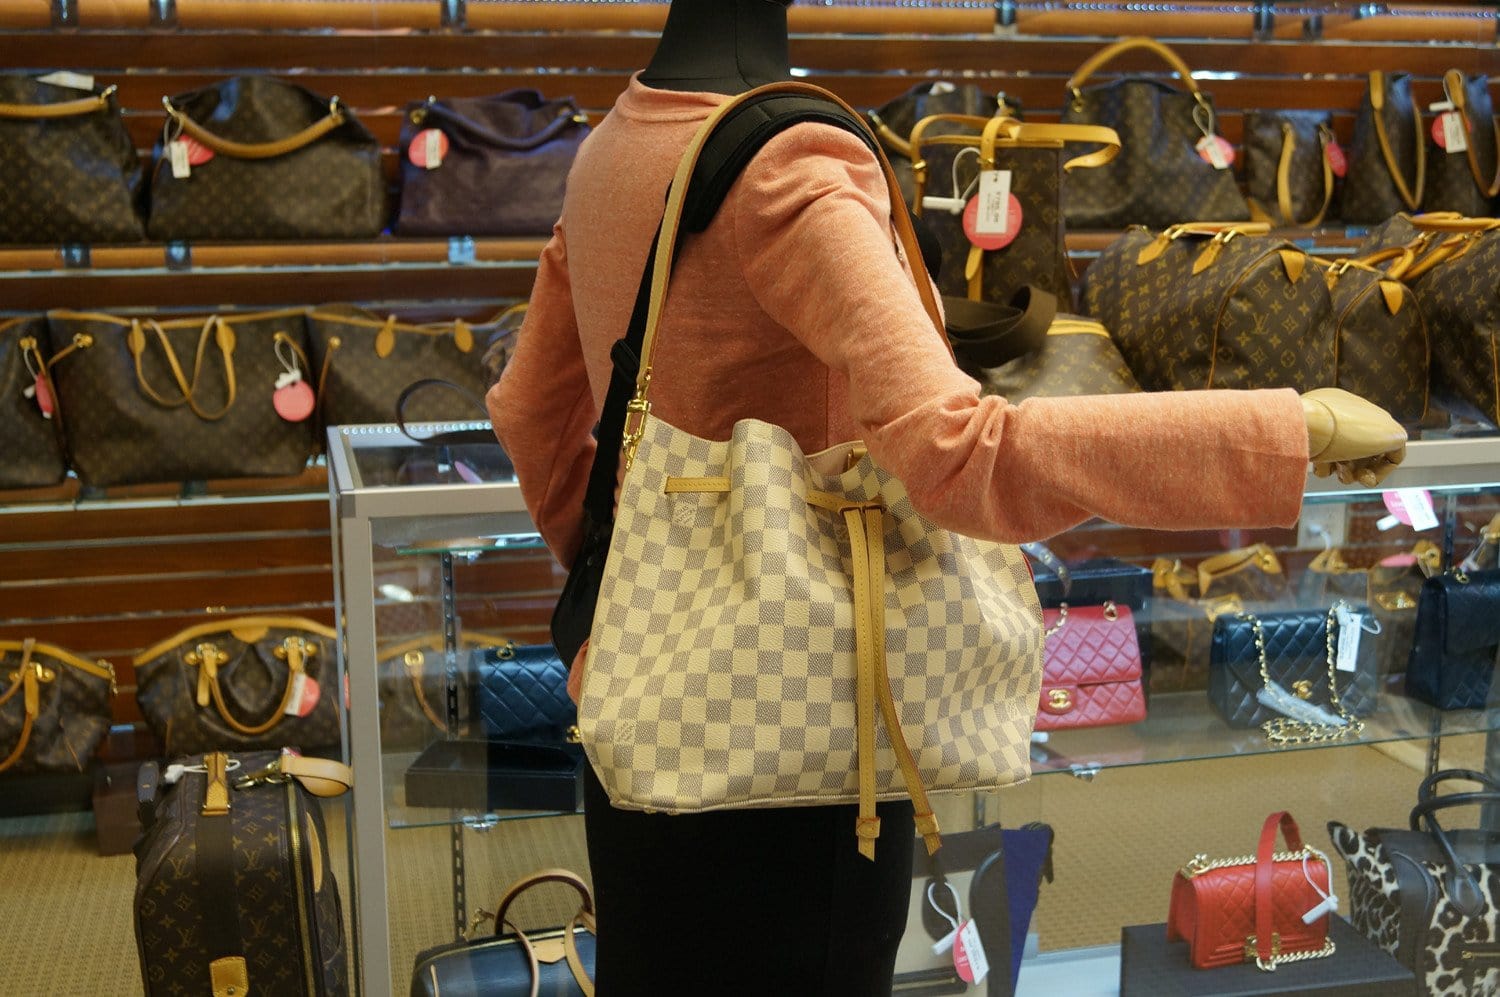 Only 718.00 usd for LOUIS VUITTON Girolata Damier Azur Online at the Shop